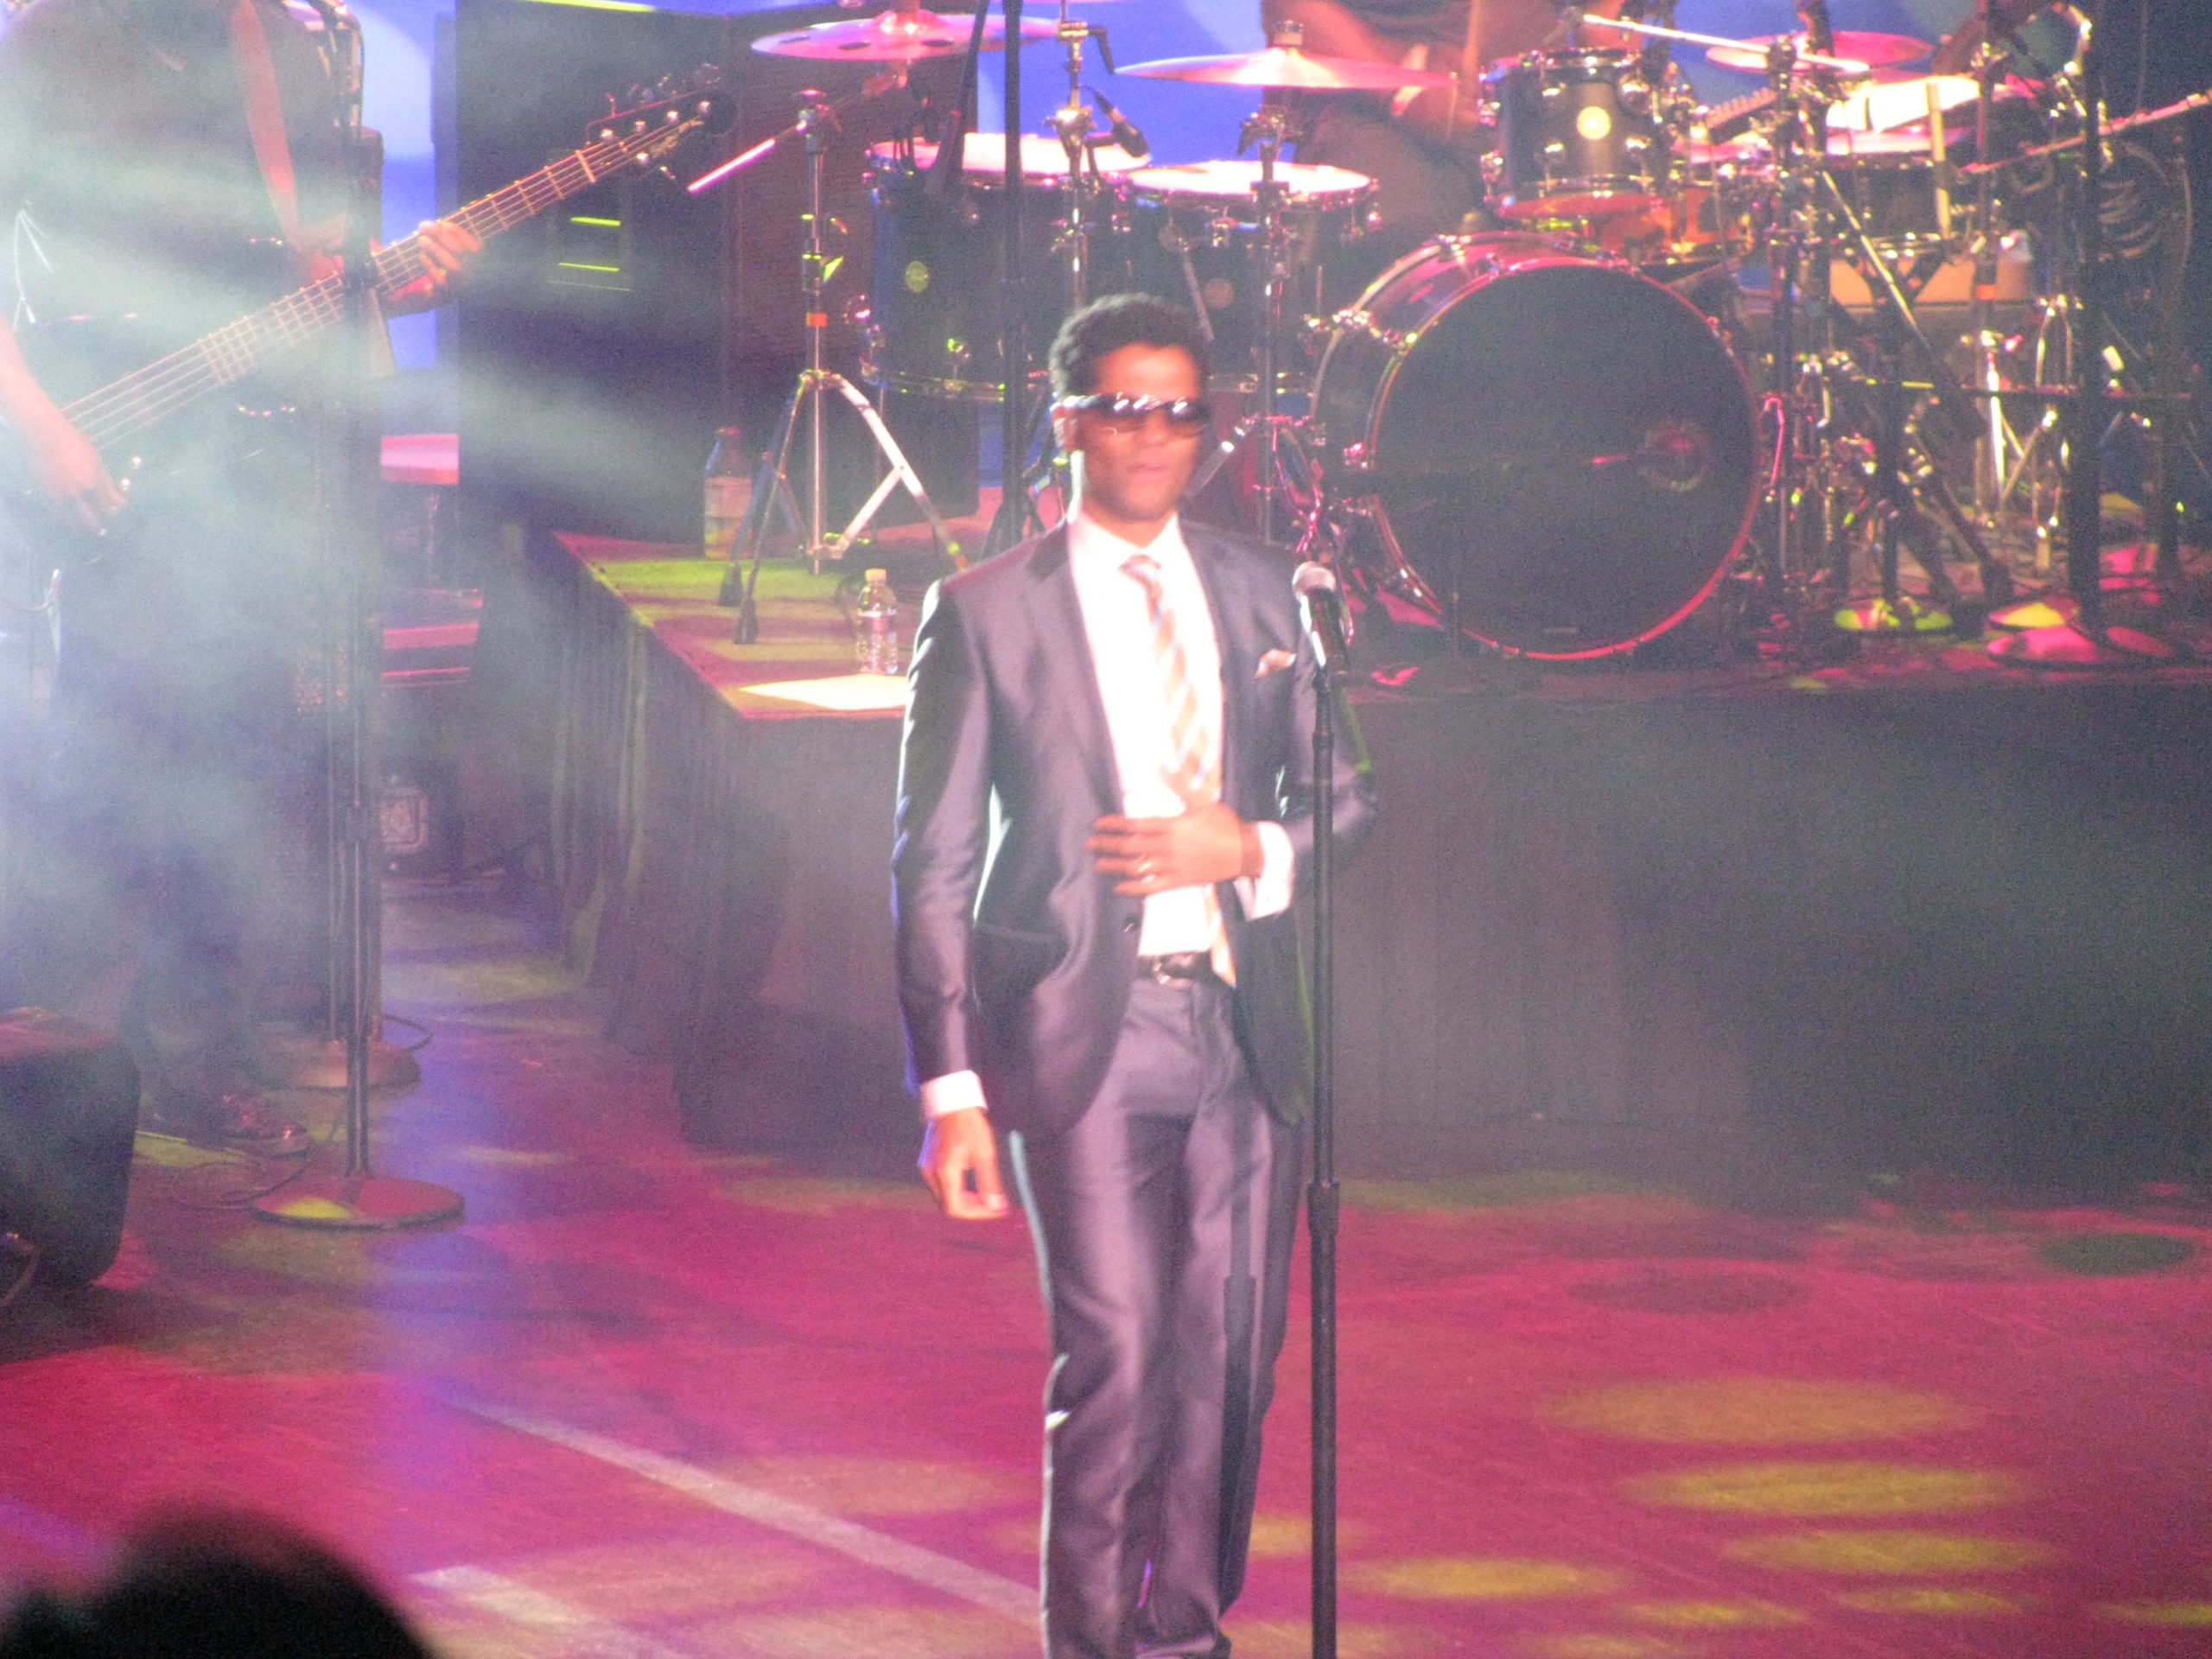 Independent Artist Eric Benet Brings Down The House In Atlantic City, NJ